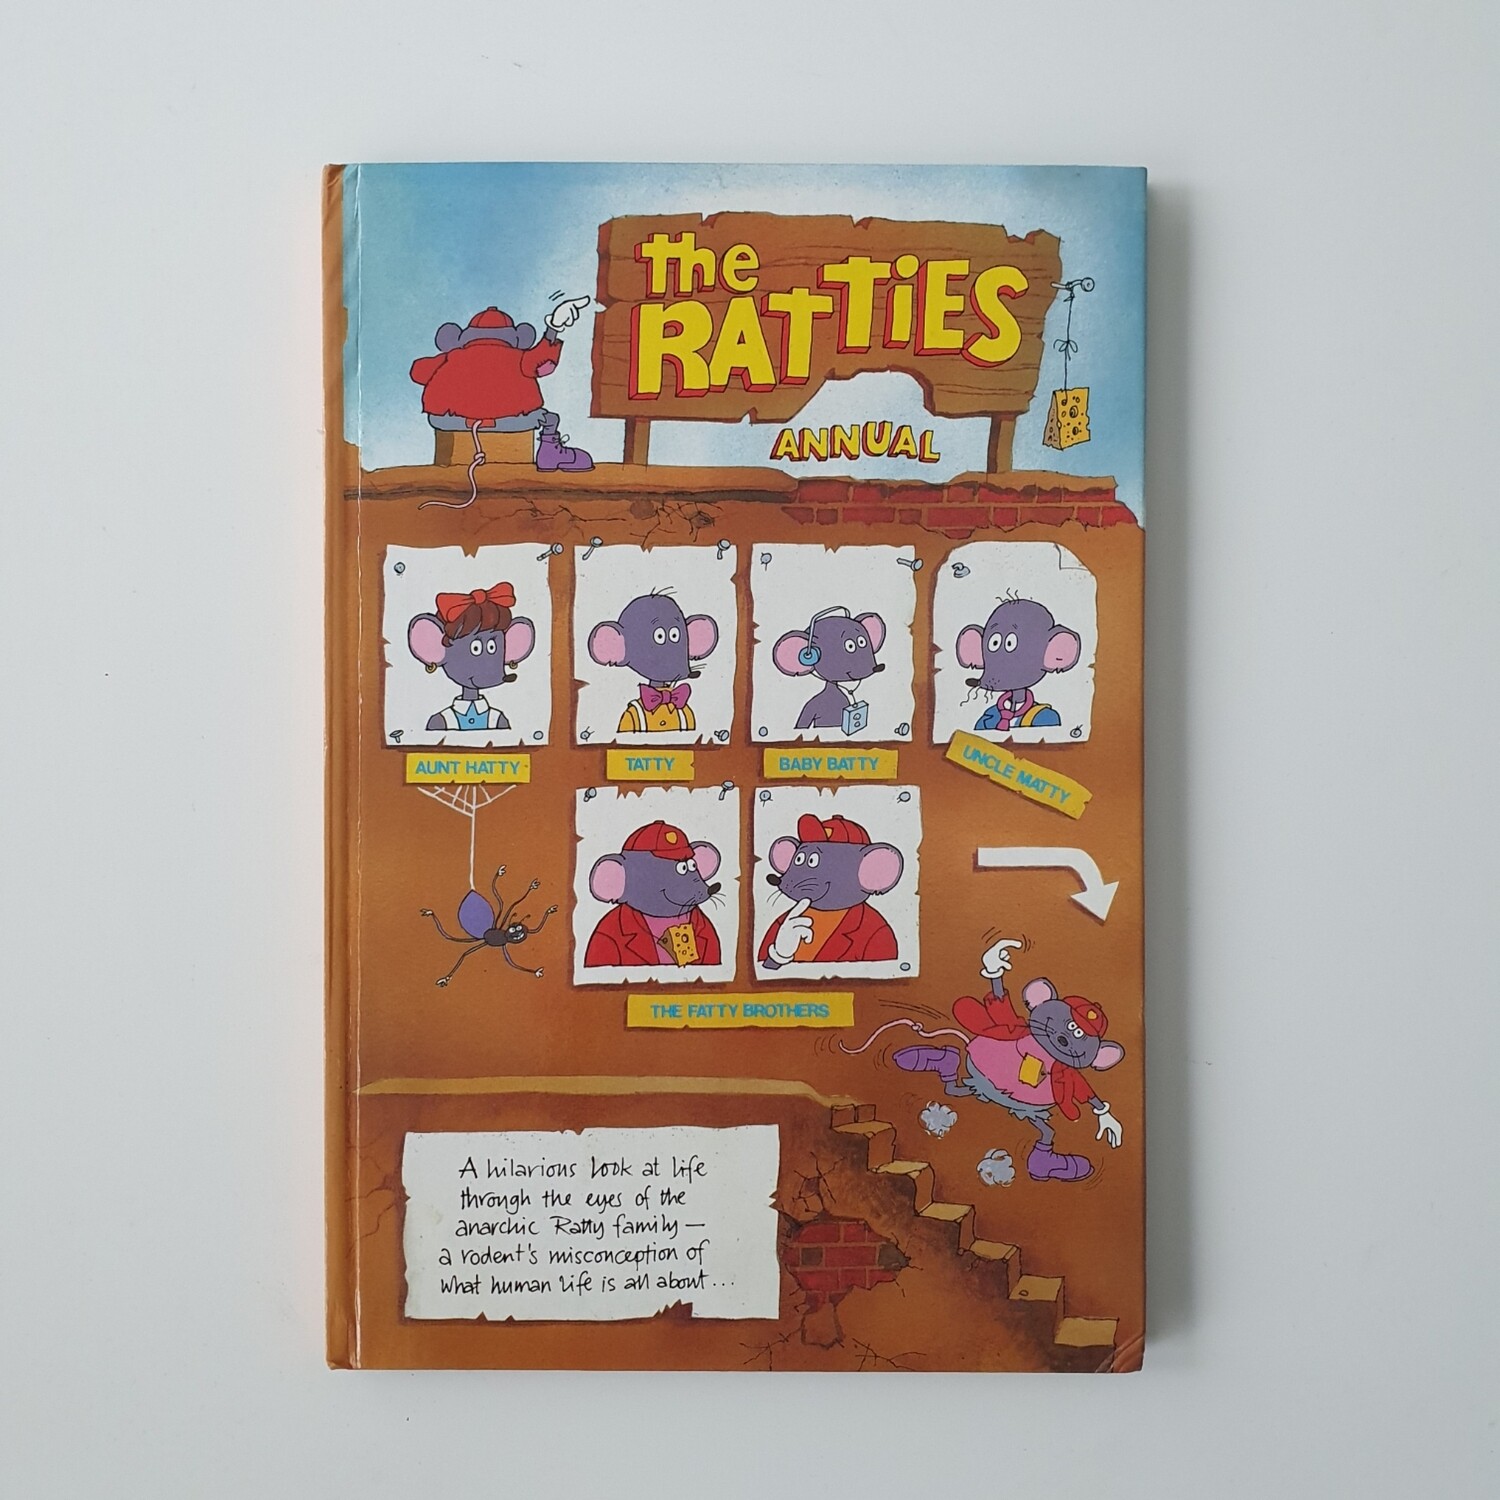 The Ratties Annual 1988